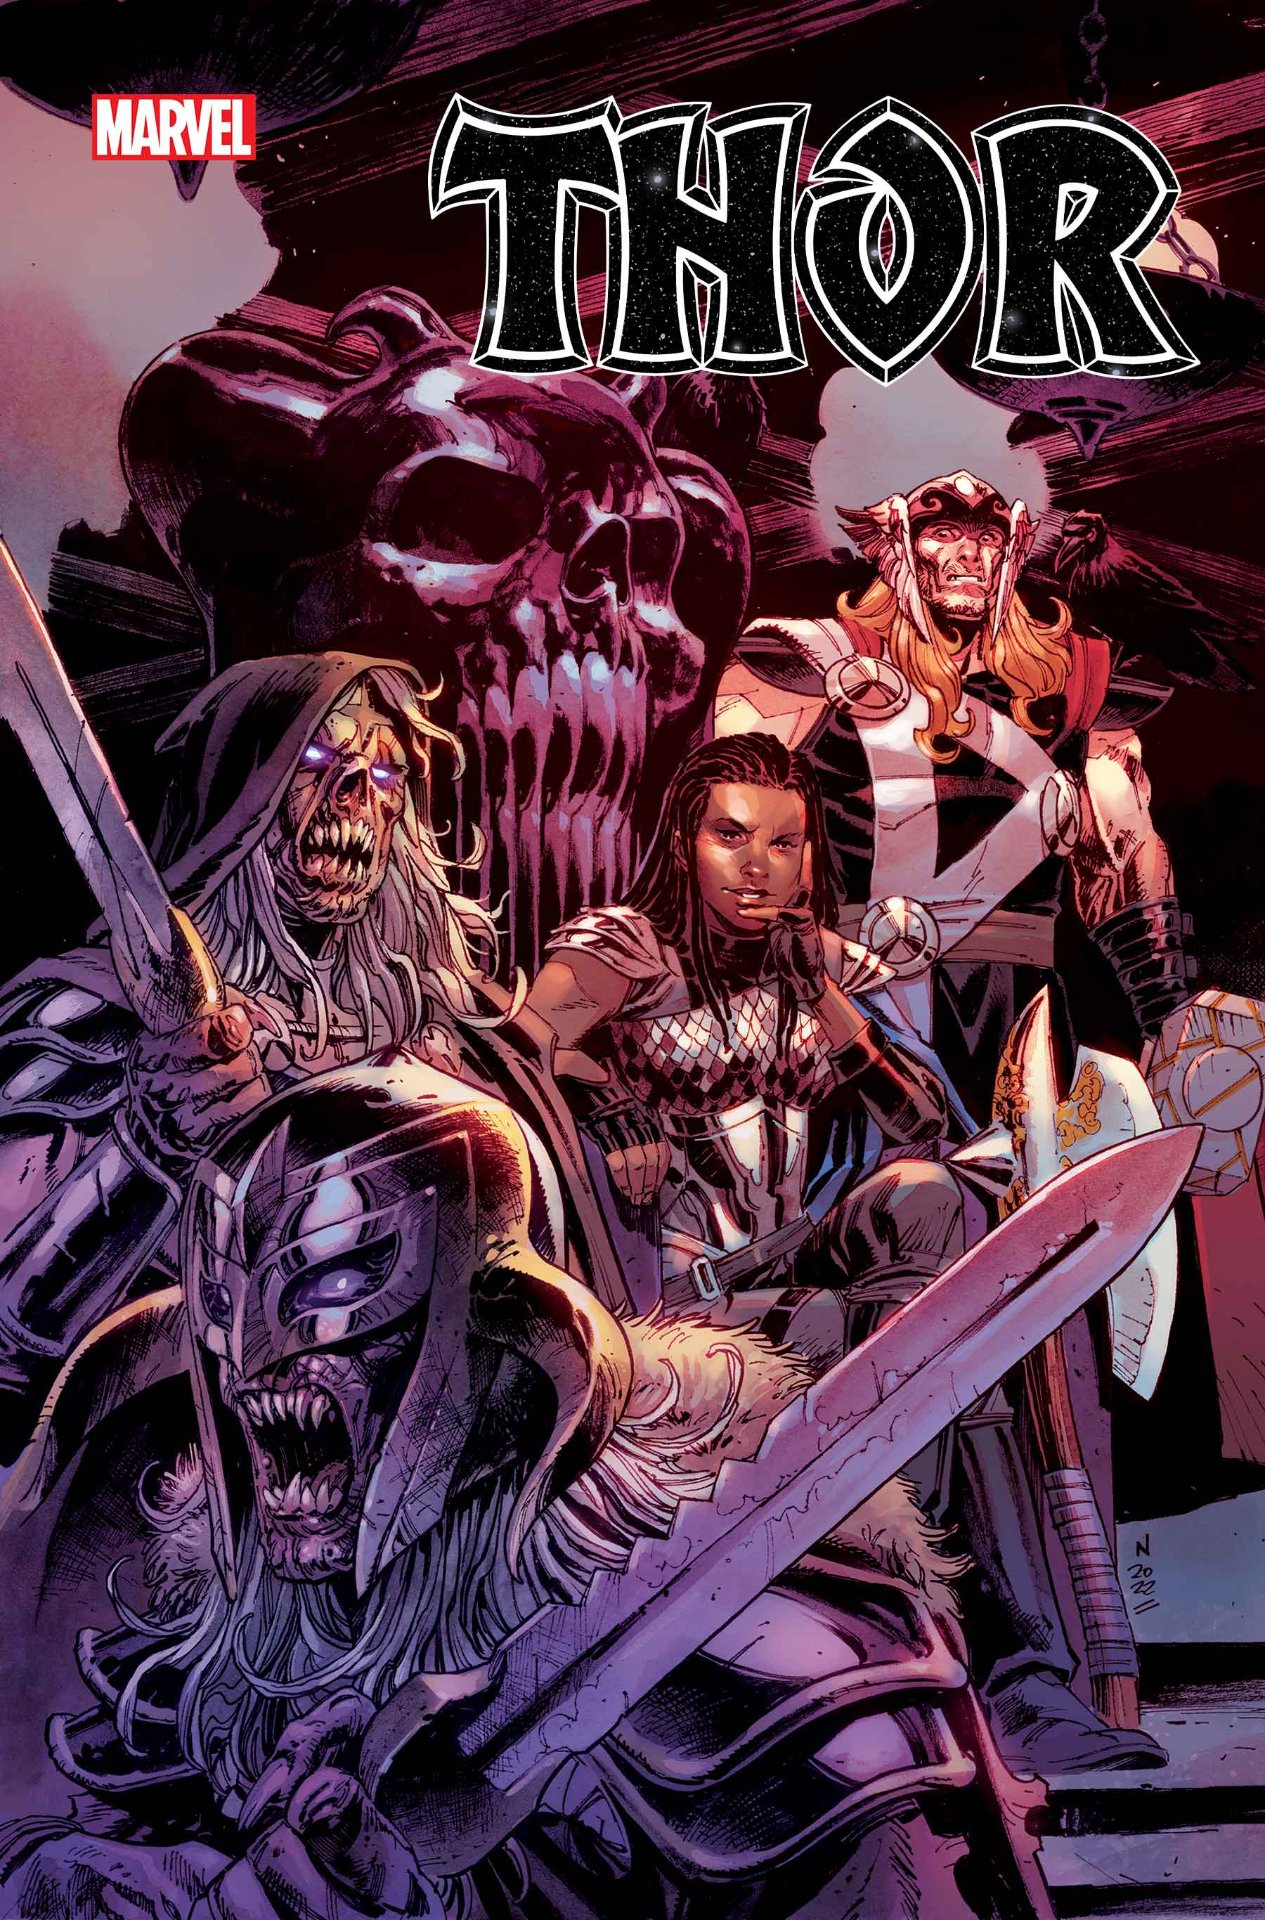 Thor #29 cover